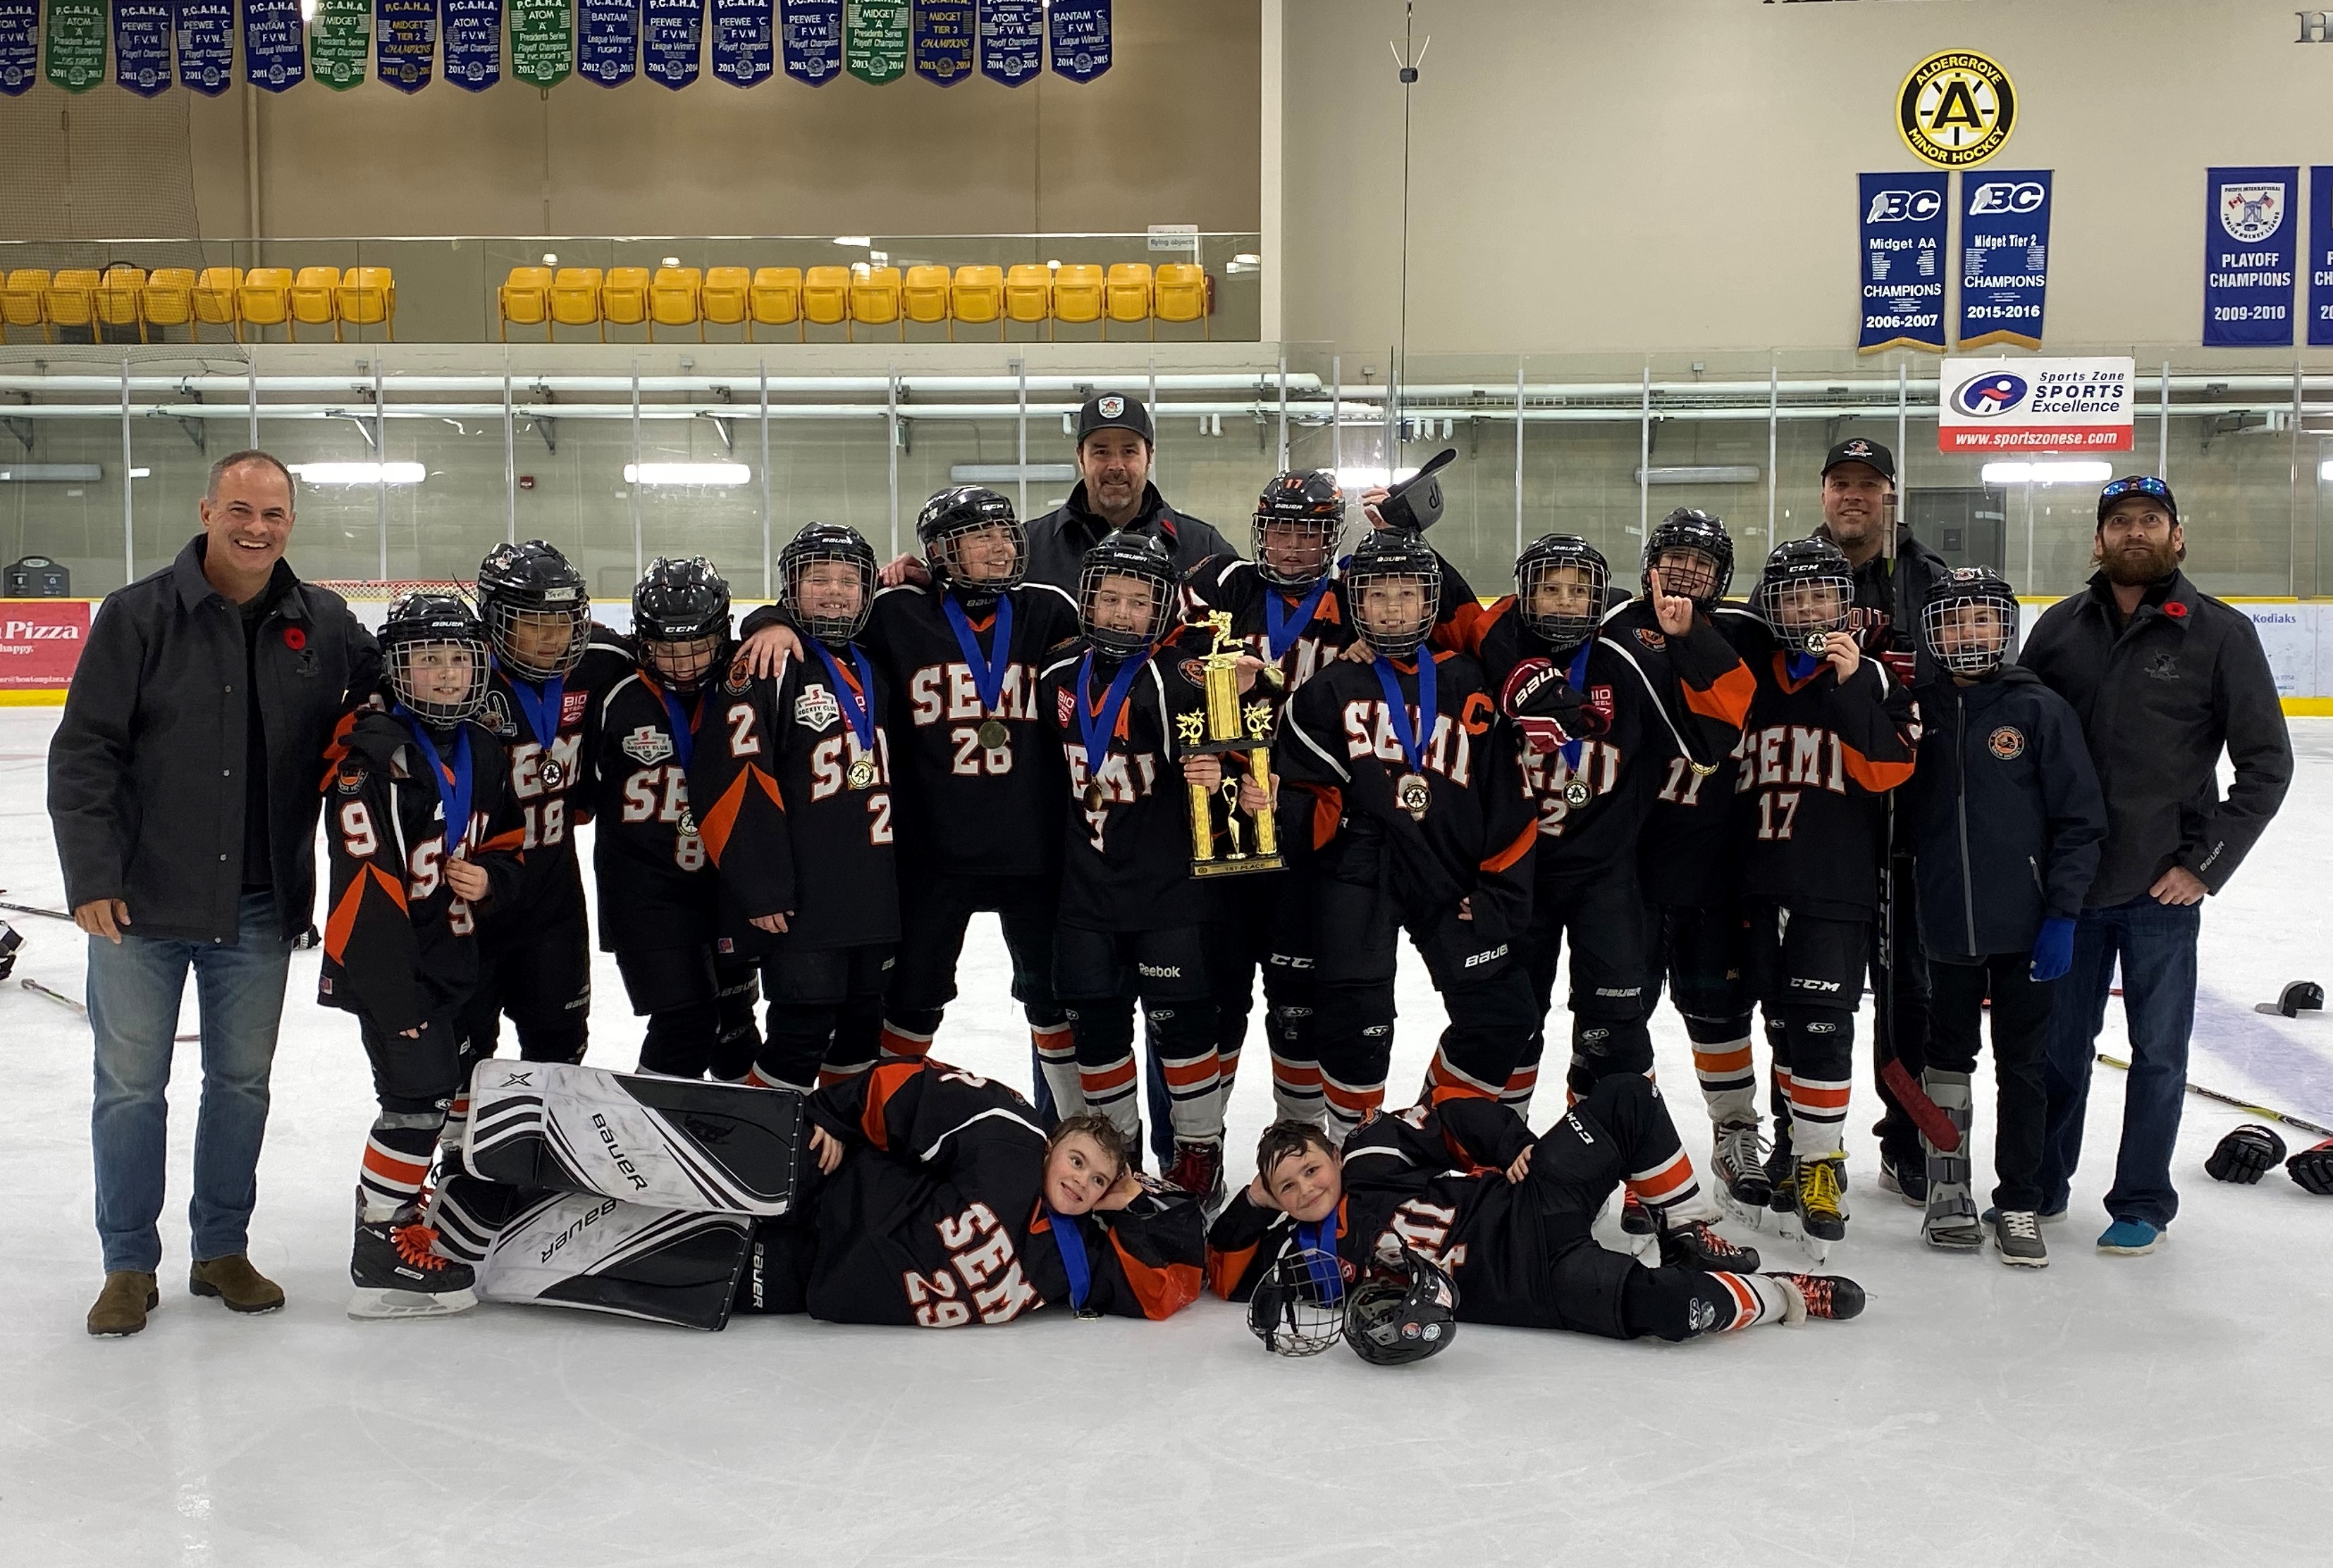 PeeWee C1 captures gold at the Aldergrove Remembrance Day tournament.